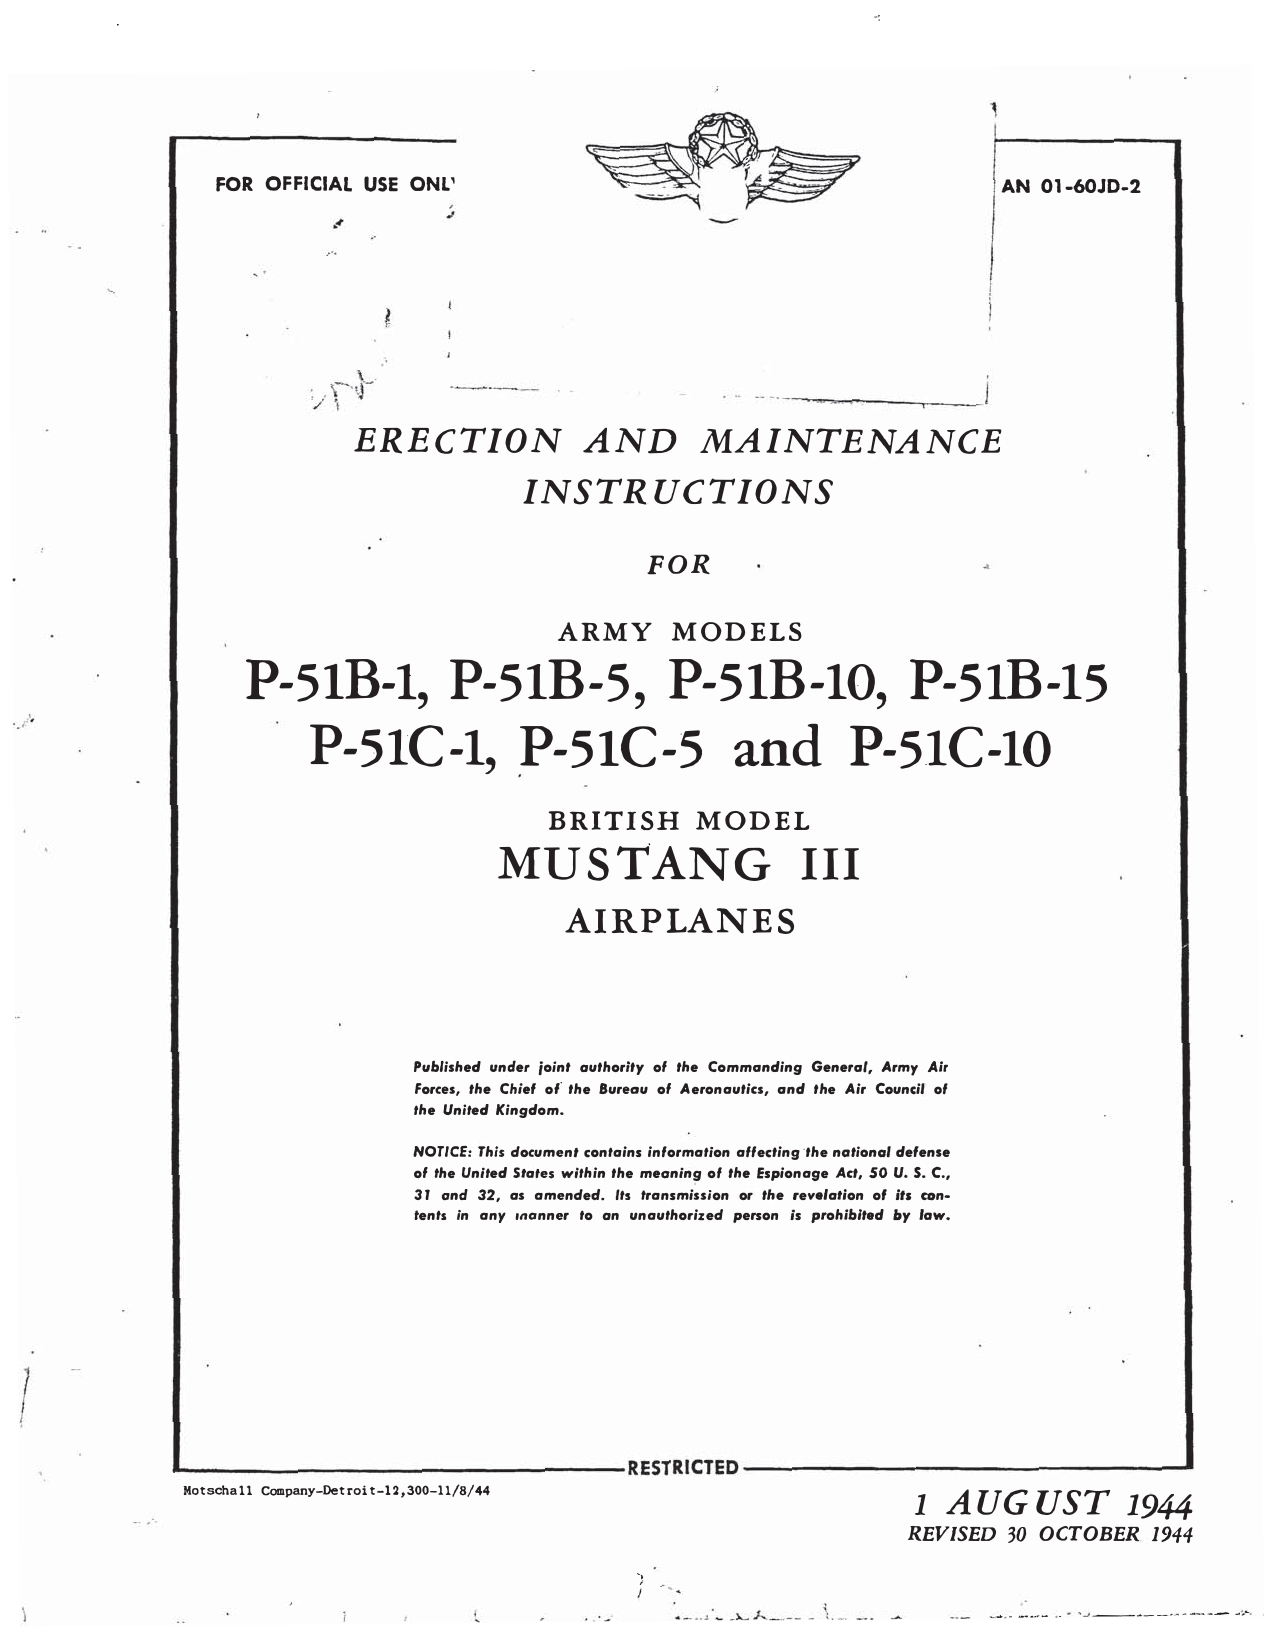 Sample page 1 from AirCorps Library document: Erection & Maintenance - P-51B P-51C